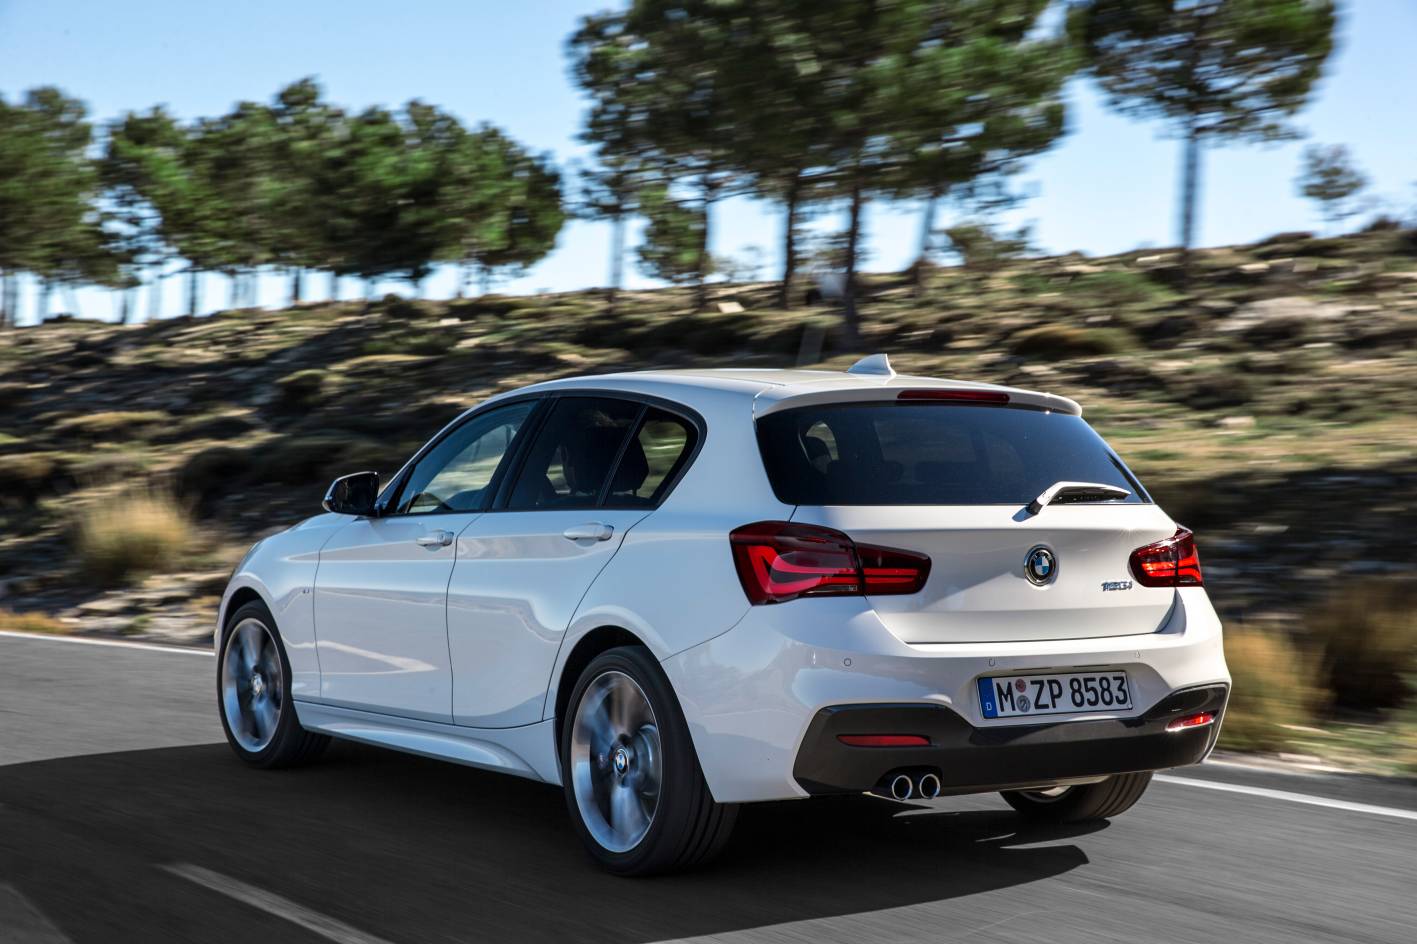 BMW Cars - News: 2015 BMW 1 Series LCI pricing and specification